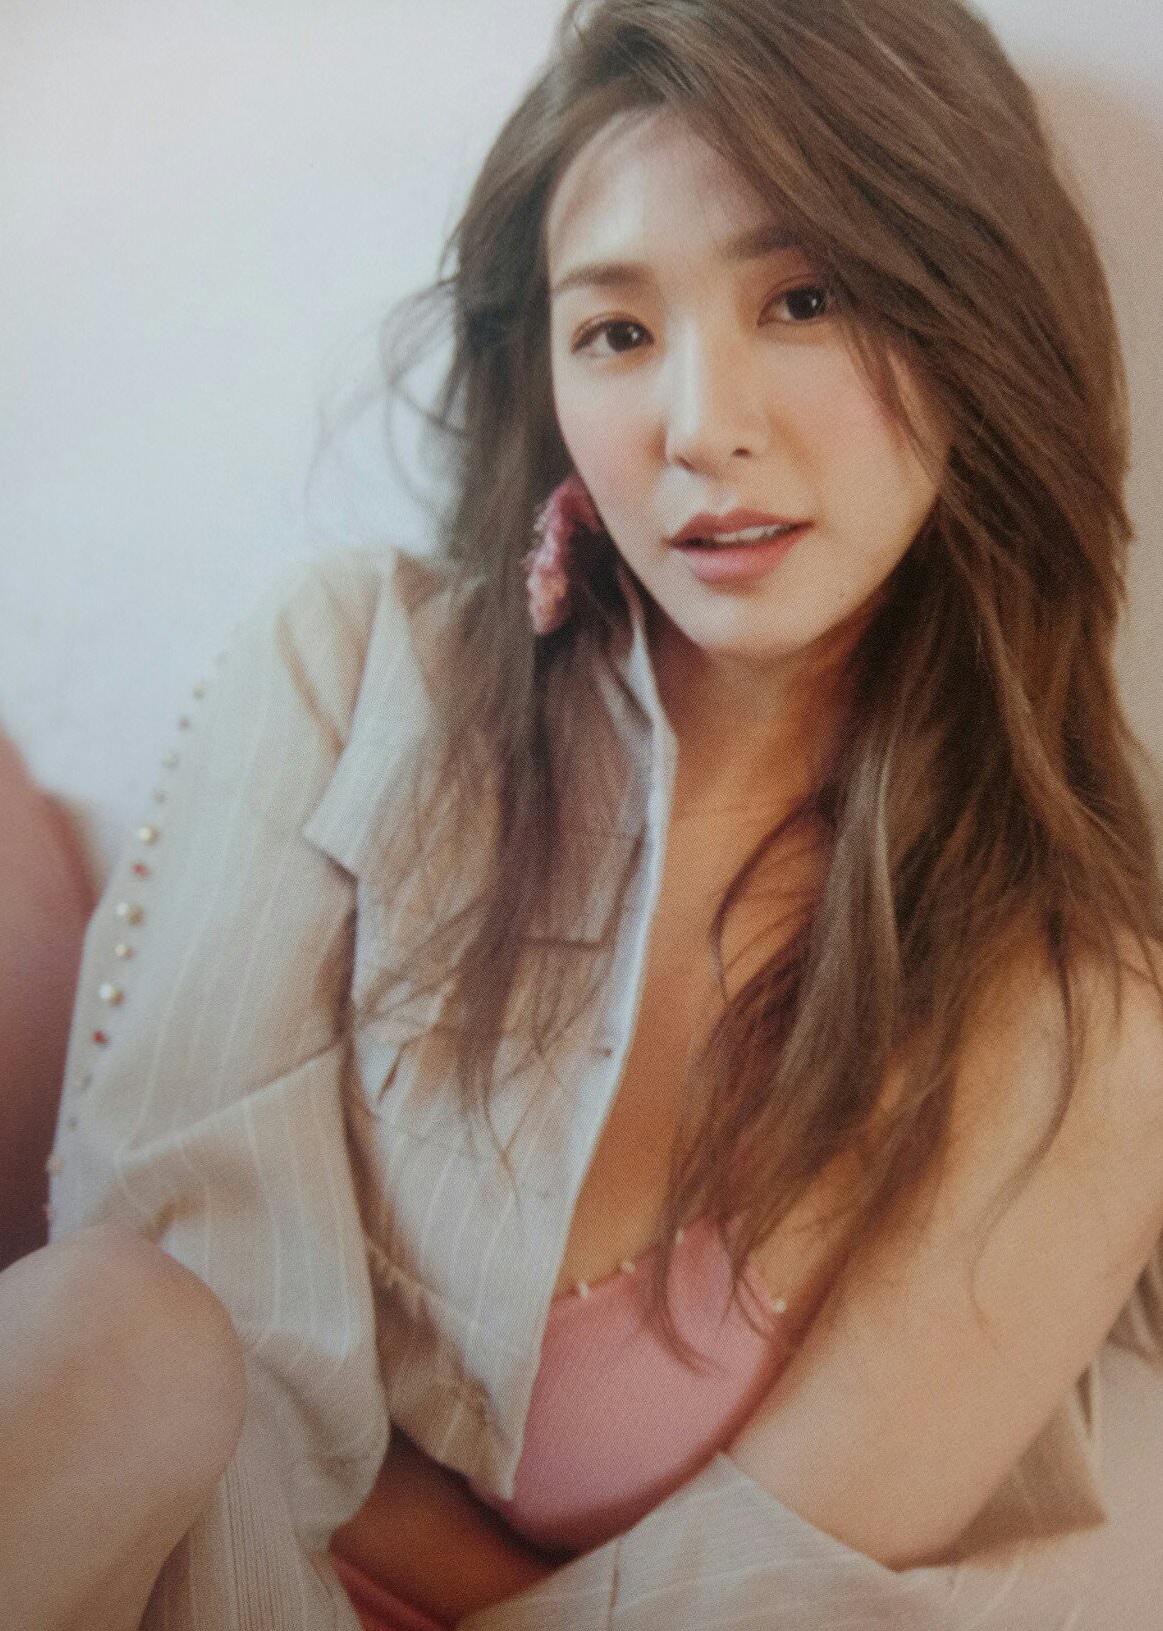 Snsd’s Tiffany Looks Amazing In A Pink Swimsuit For … Uh Whatever